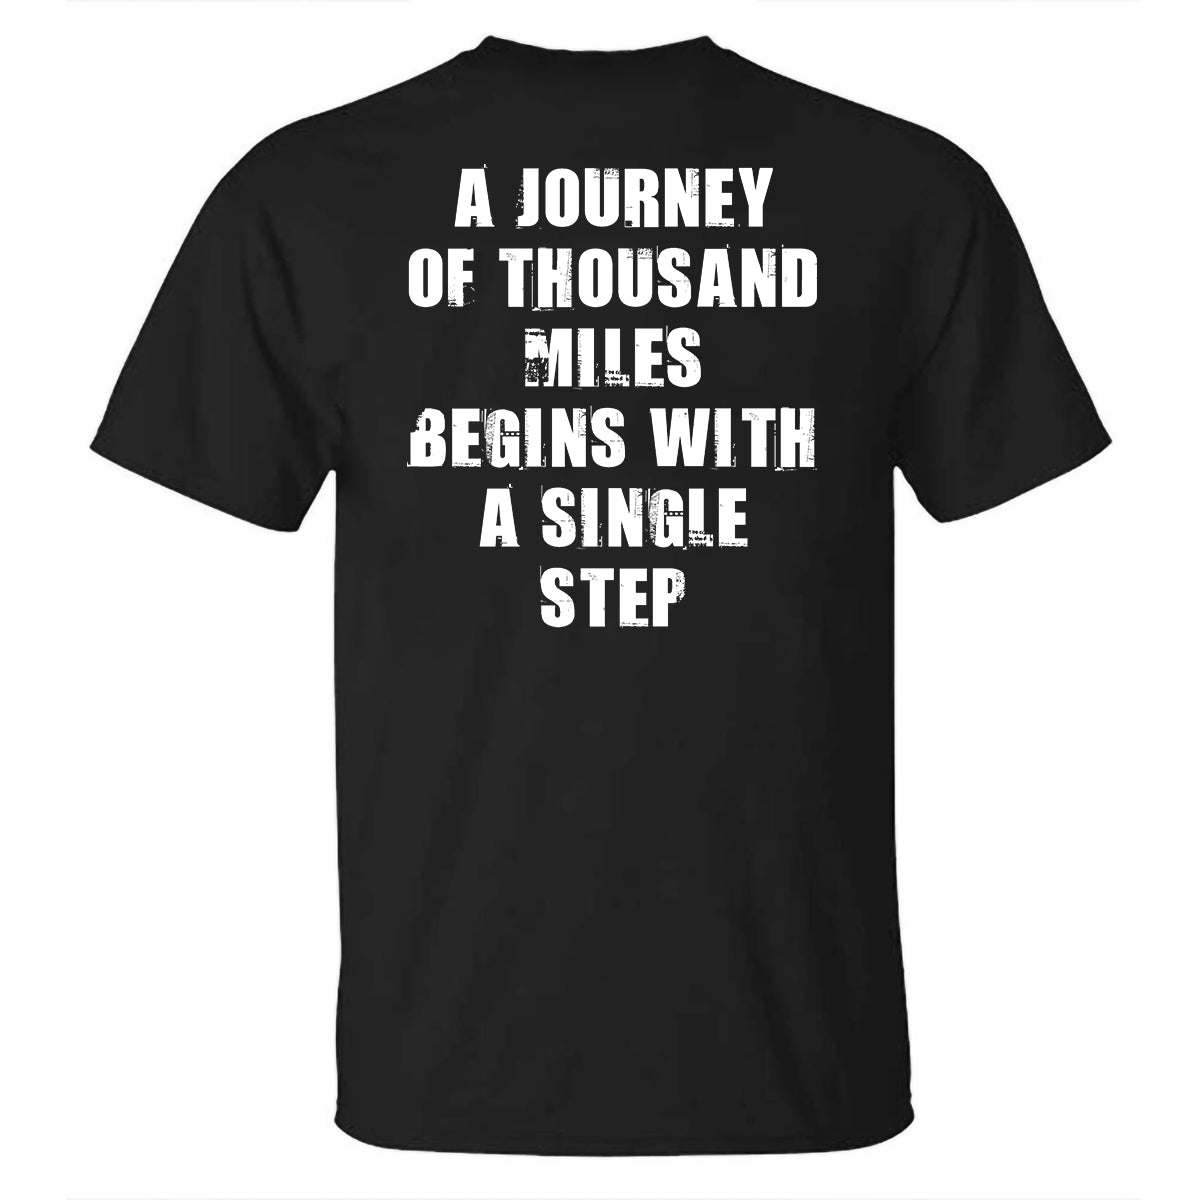 A Journey Of Thousand Miles Begins With A Single Step Printed T-shirt